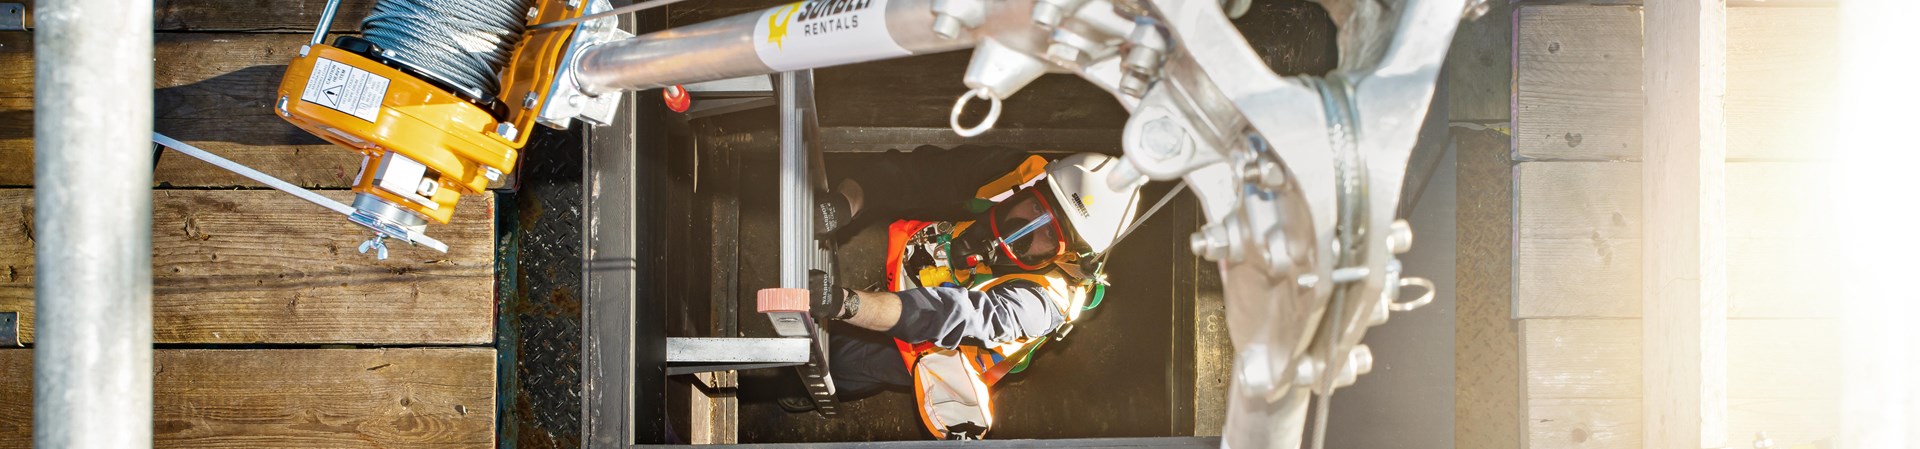 Sunbelt Rentals confined space training solutions.